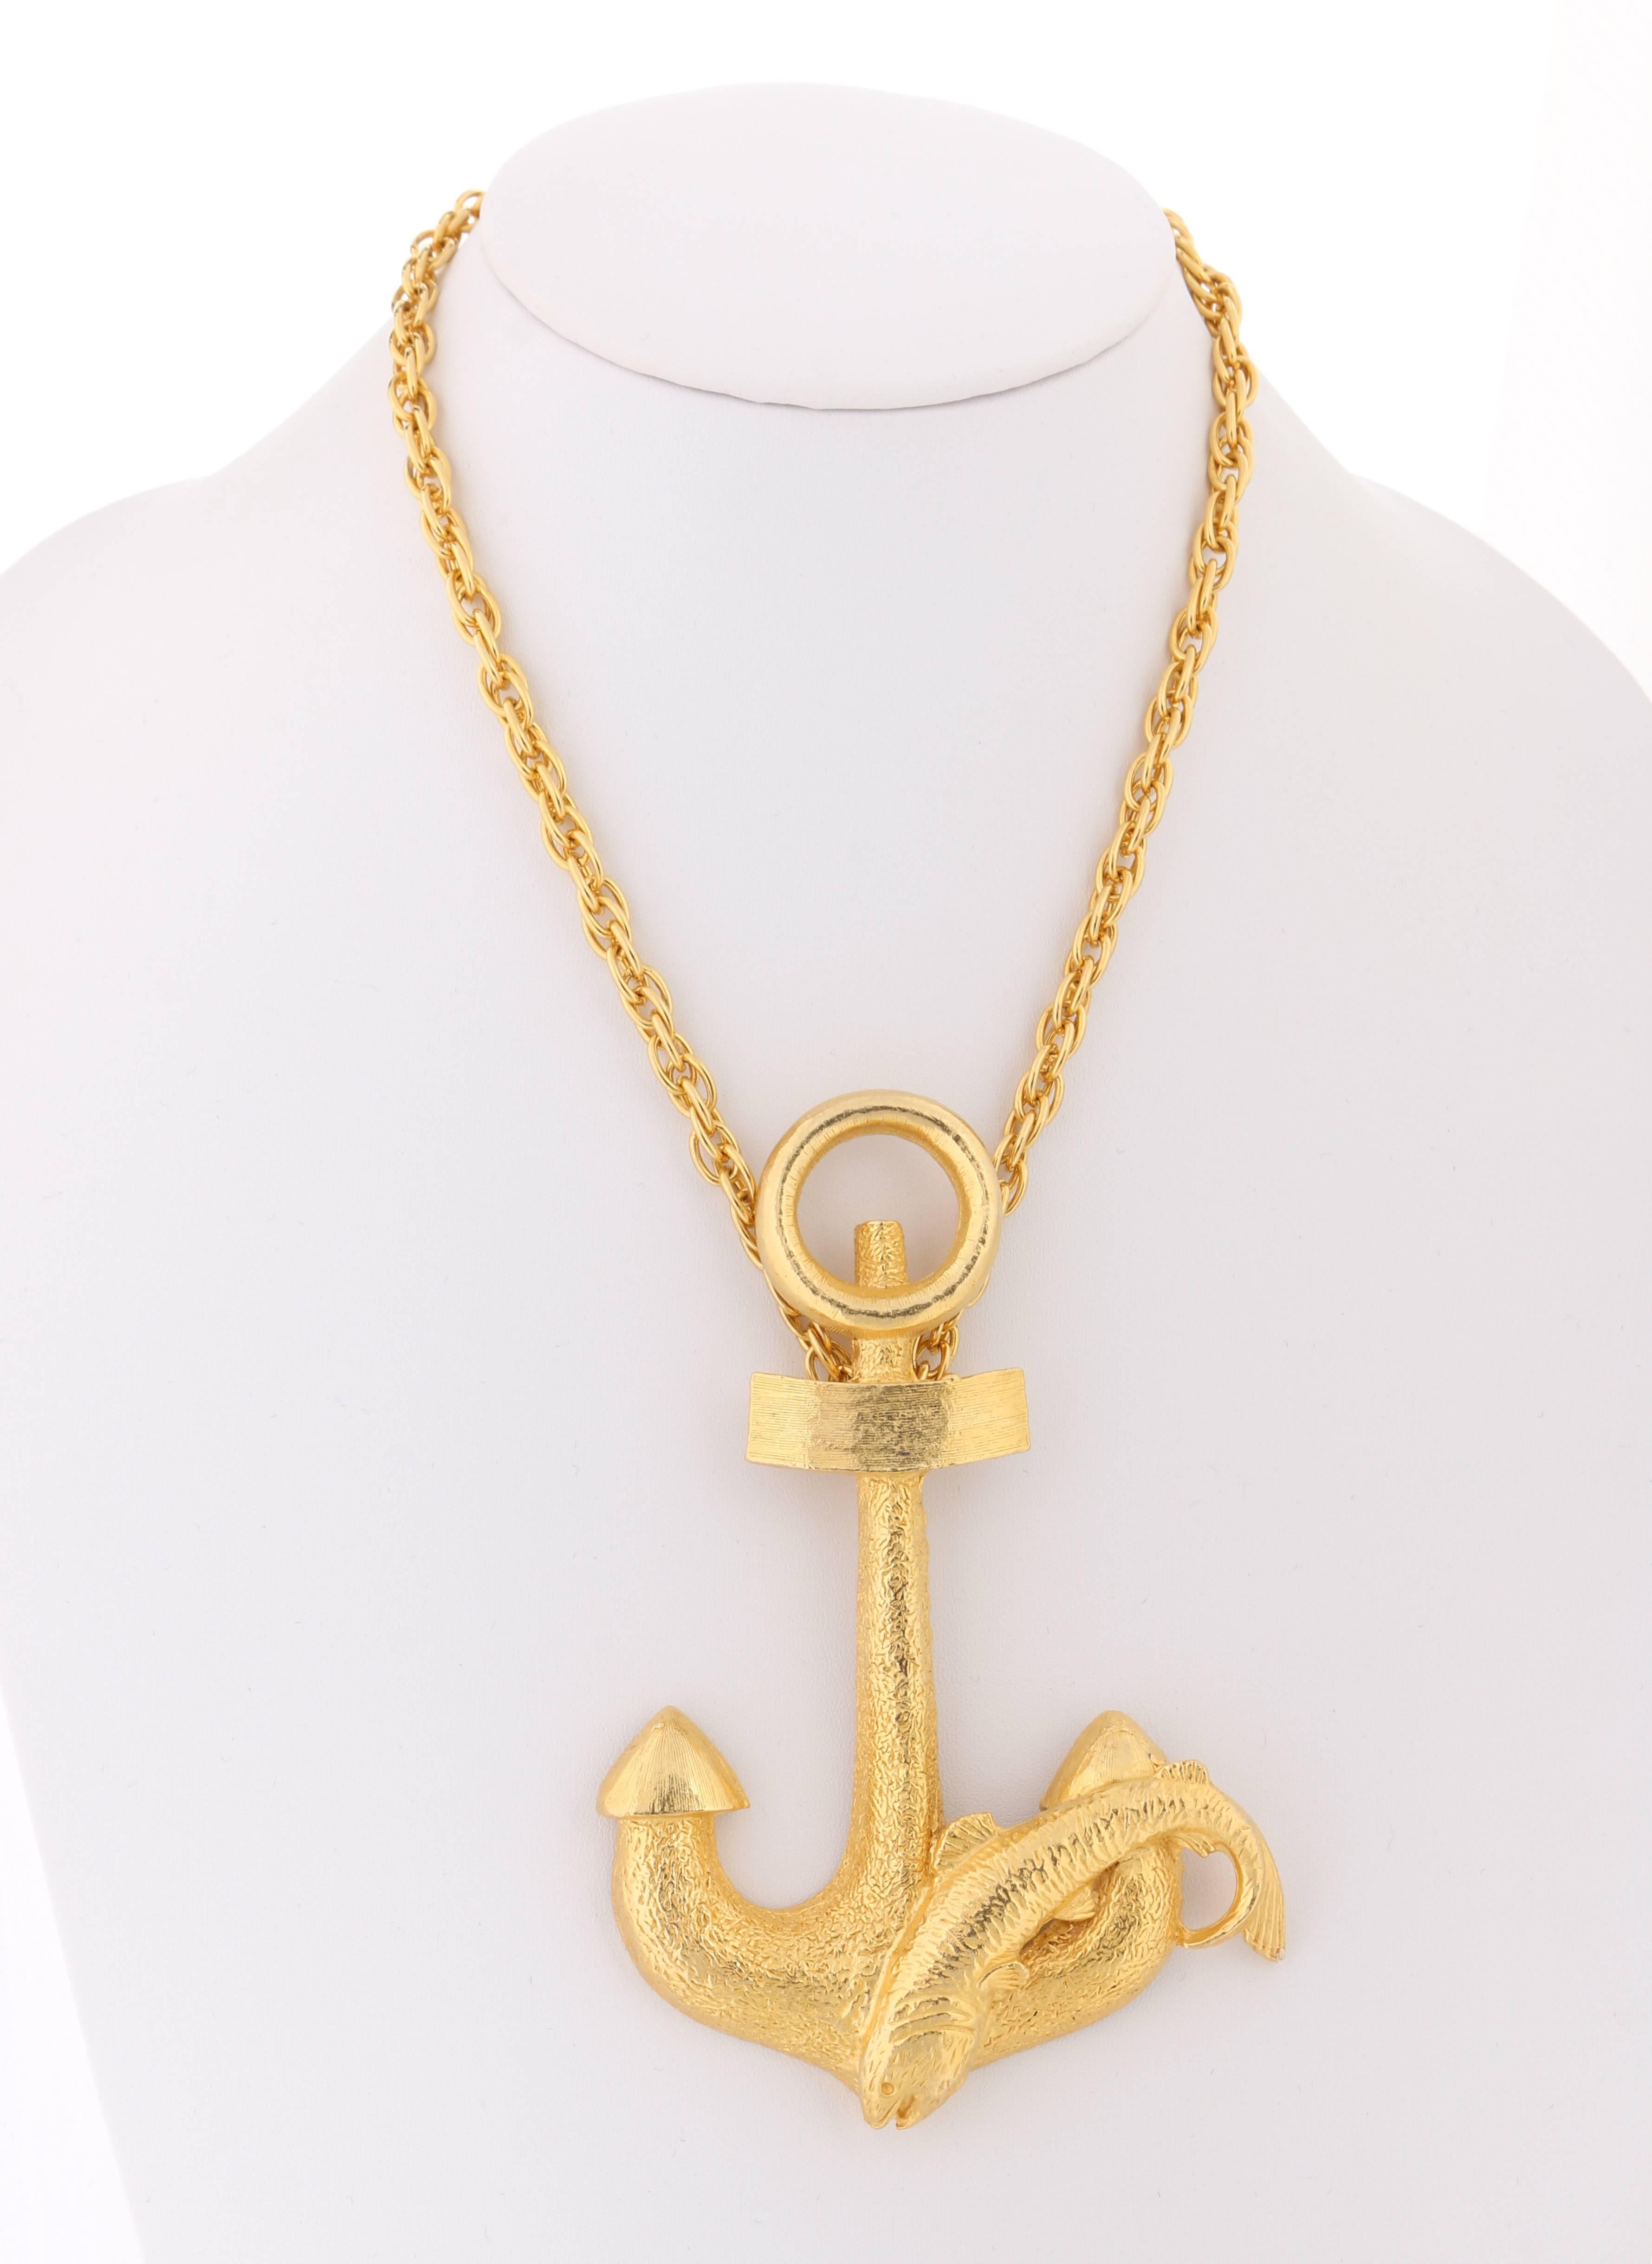 Vintage Hattie Carnegie c.1970's large anchor pendant statement necklace. Large gold-toned etched metal anchor pendant with integrated fish. Pendant is suspended by a polished gold-toned short prince of wales chain. Necklace fastens with a spring